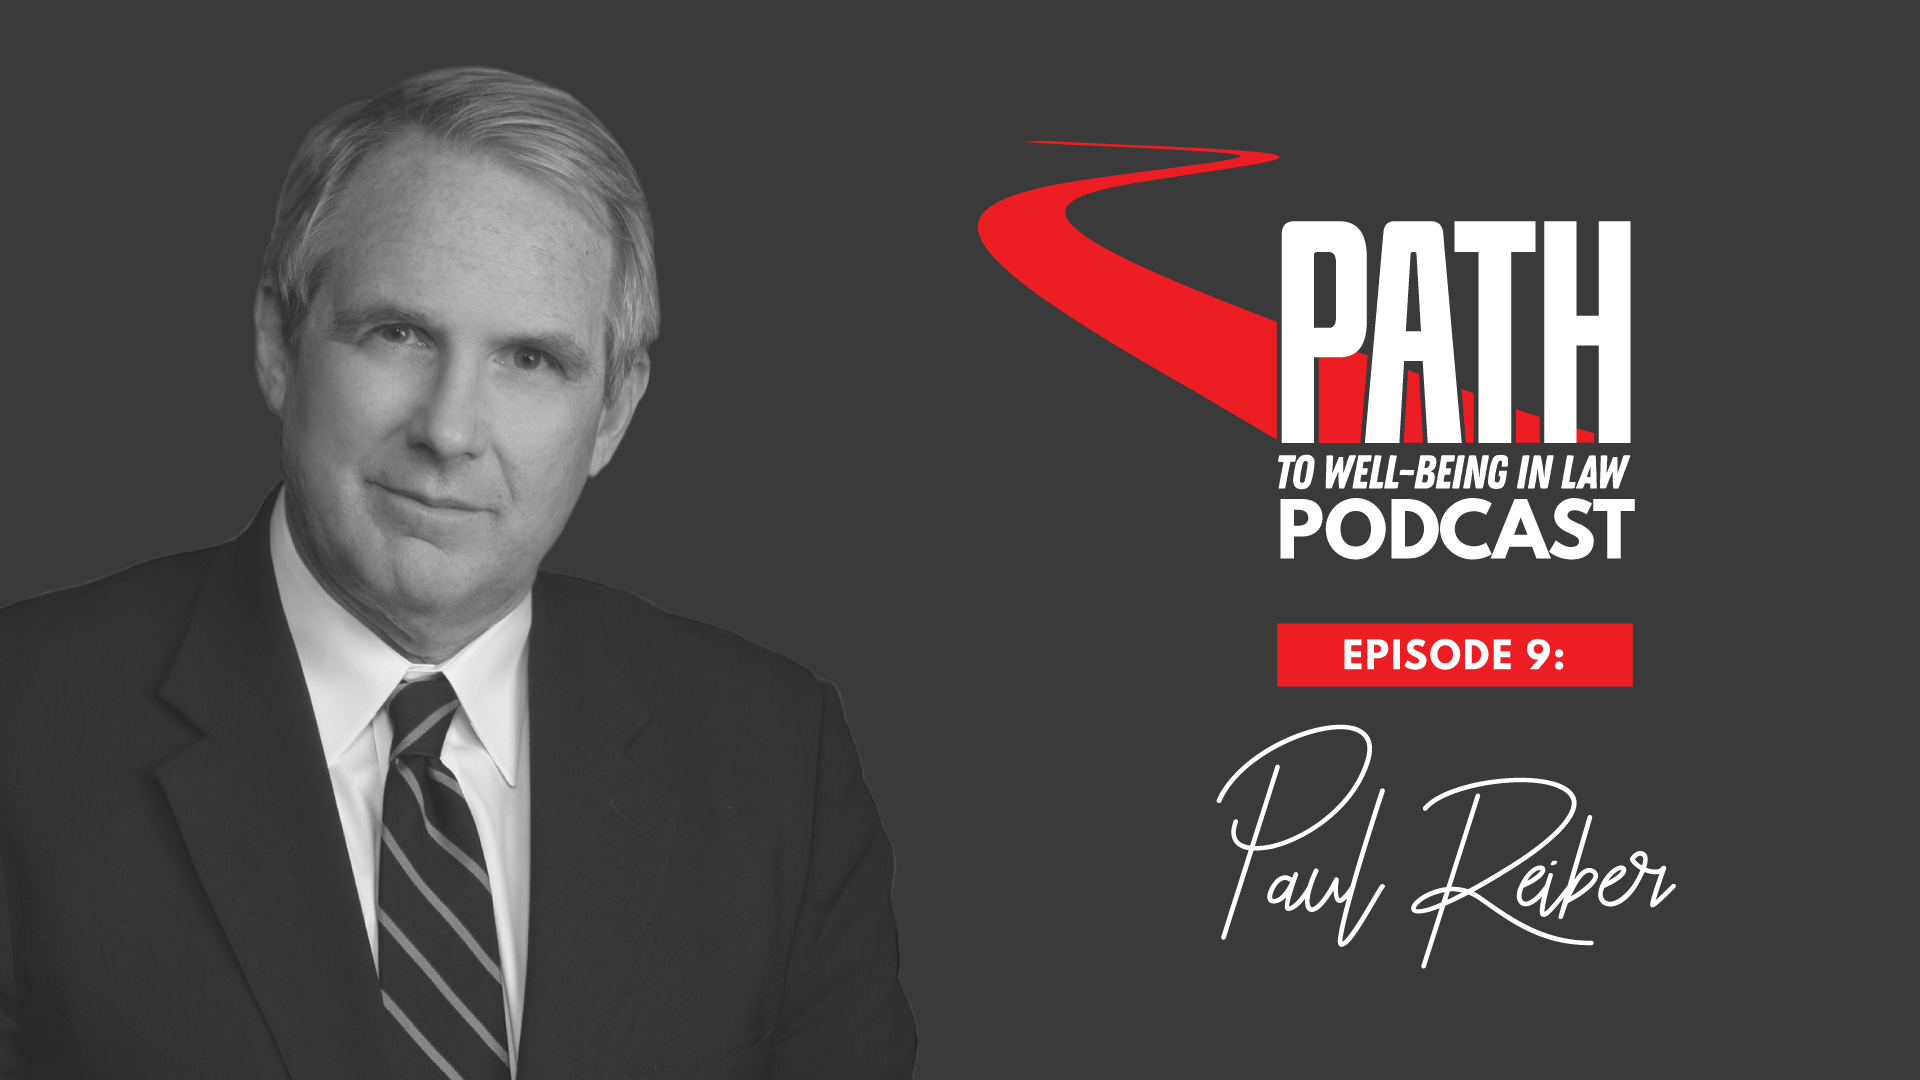 Path To Well-Being In Law Podcast: Episode 9 – Chief Justice Paul Reiber